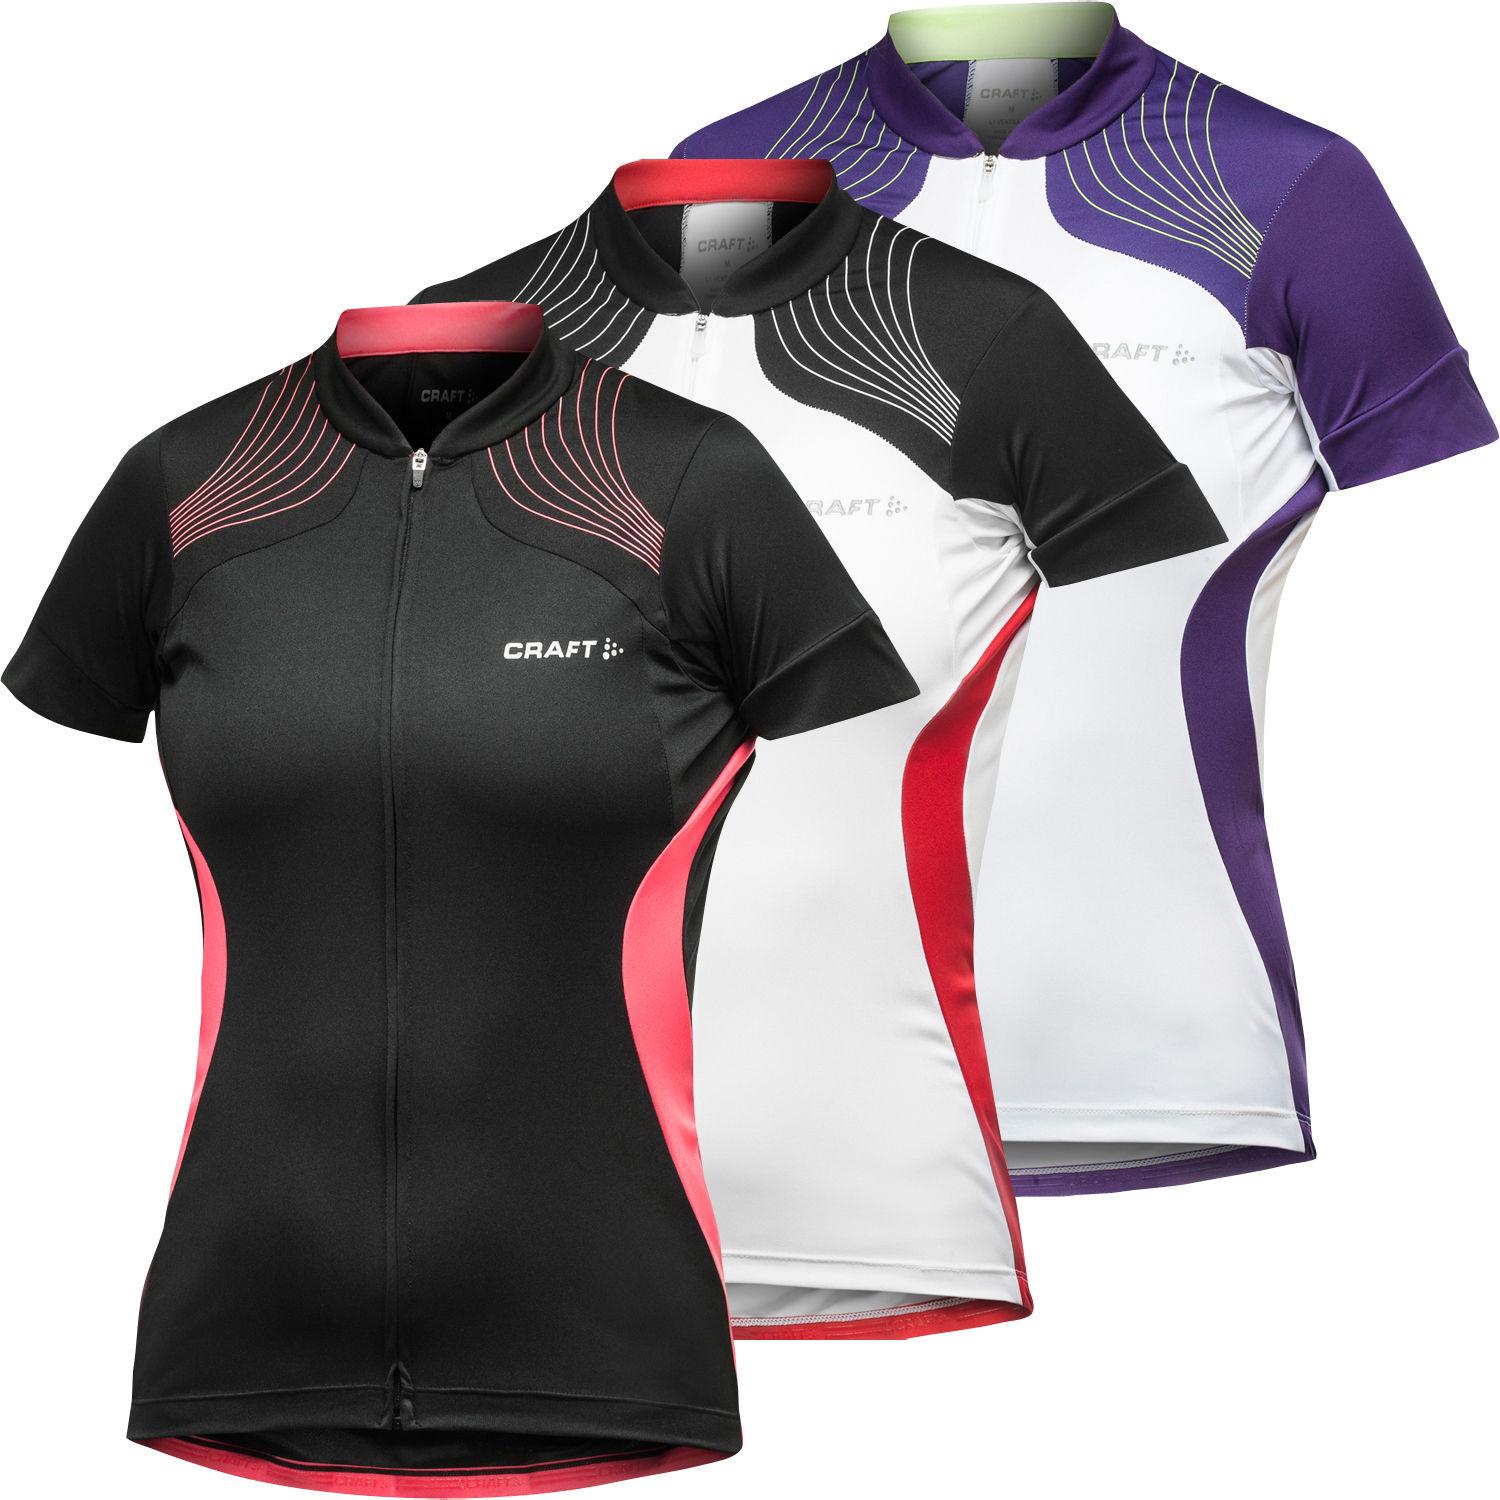 Foto Maillot ciclista para mujer Craft - Performance - Extra Large